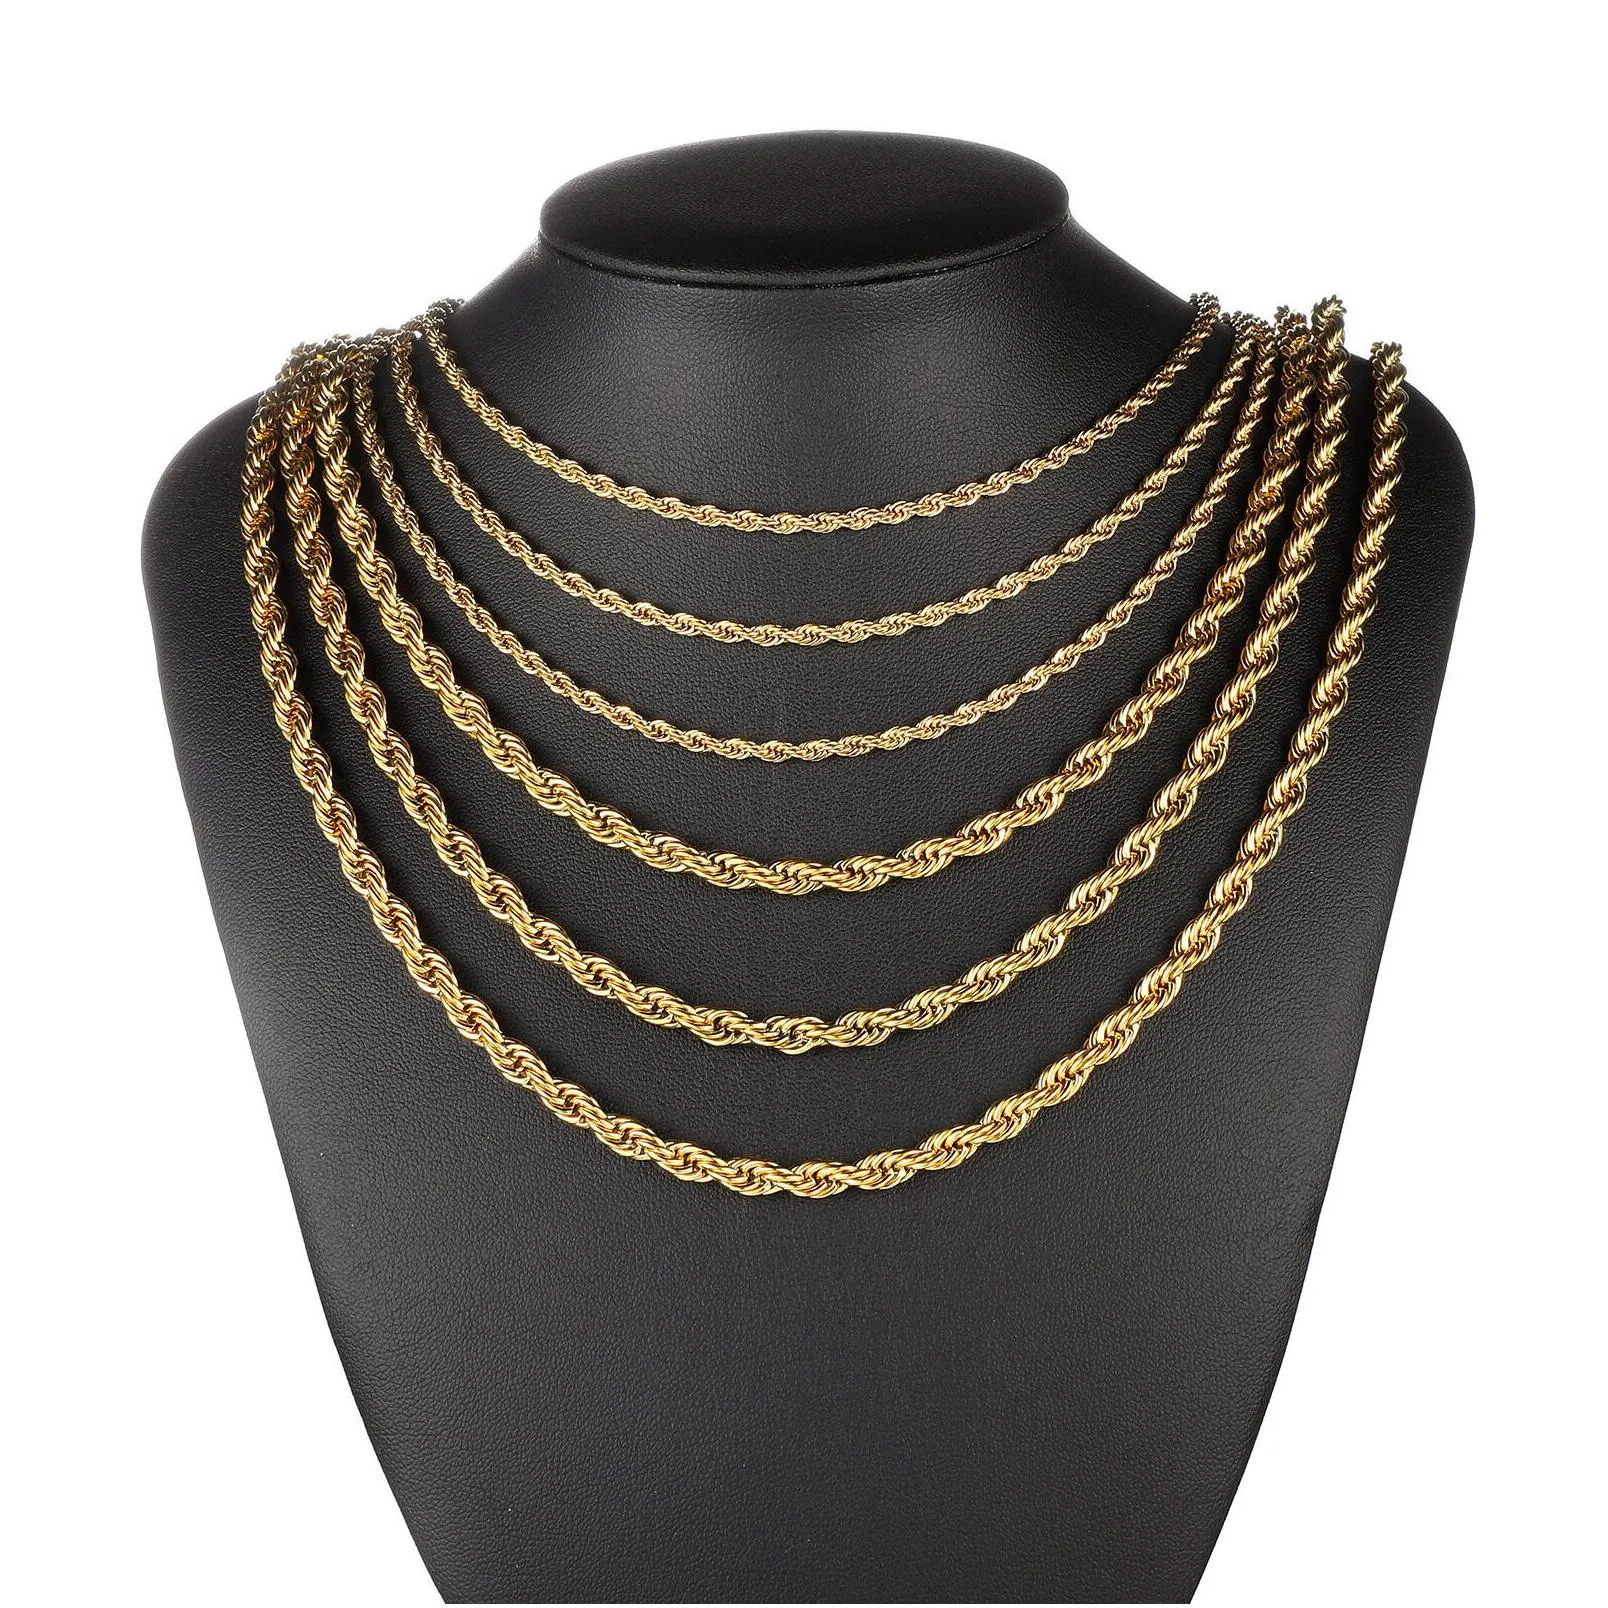 Chains 2-6Mm Twisted Singapore Gold Chain Necklace Stainless Steel Never Fade Waterproof Choker Men Women Fashion Jewelry Jewelry Neck Dhwec